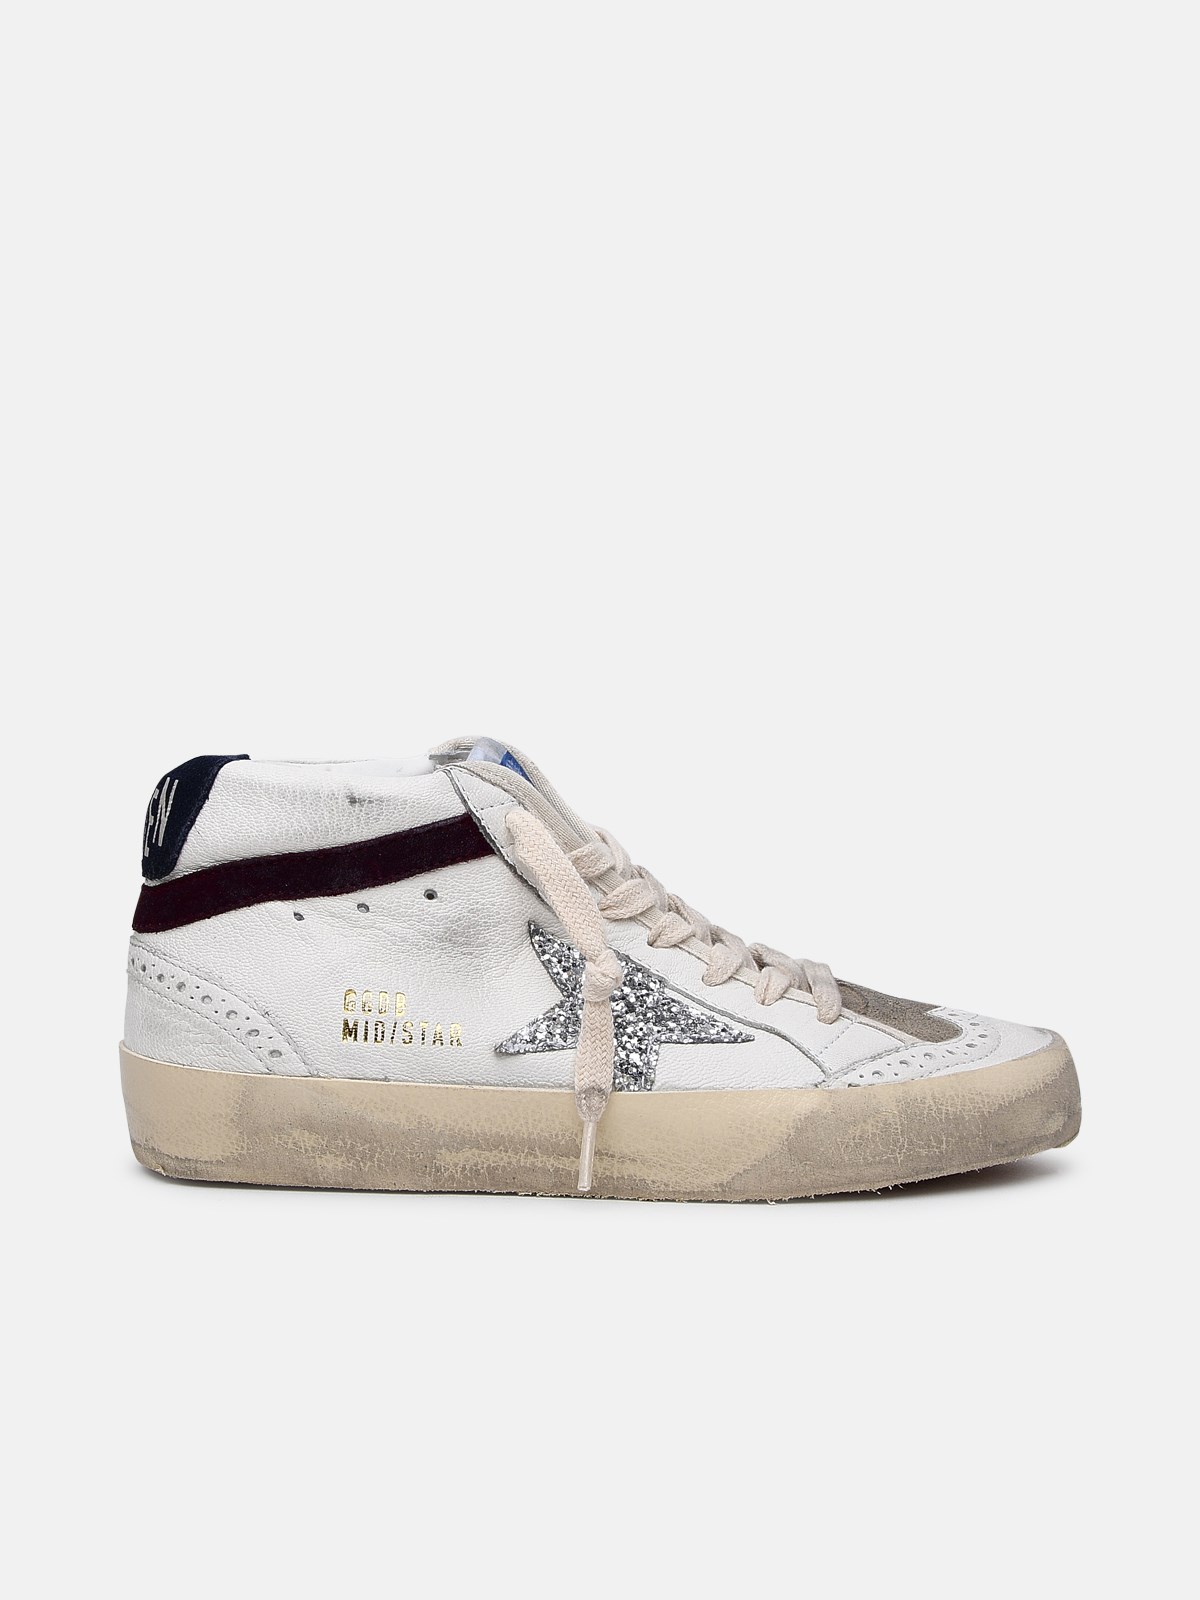 Golden Goose White Leather Mid Star Sneakers